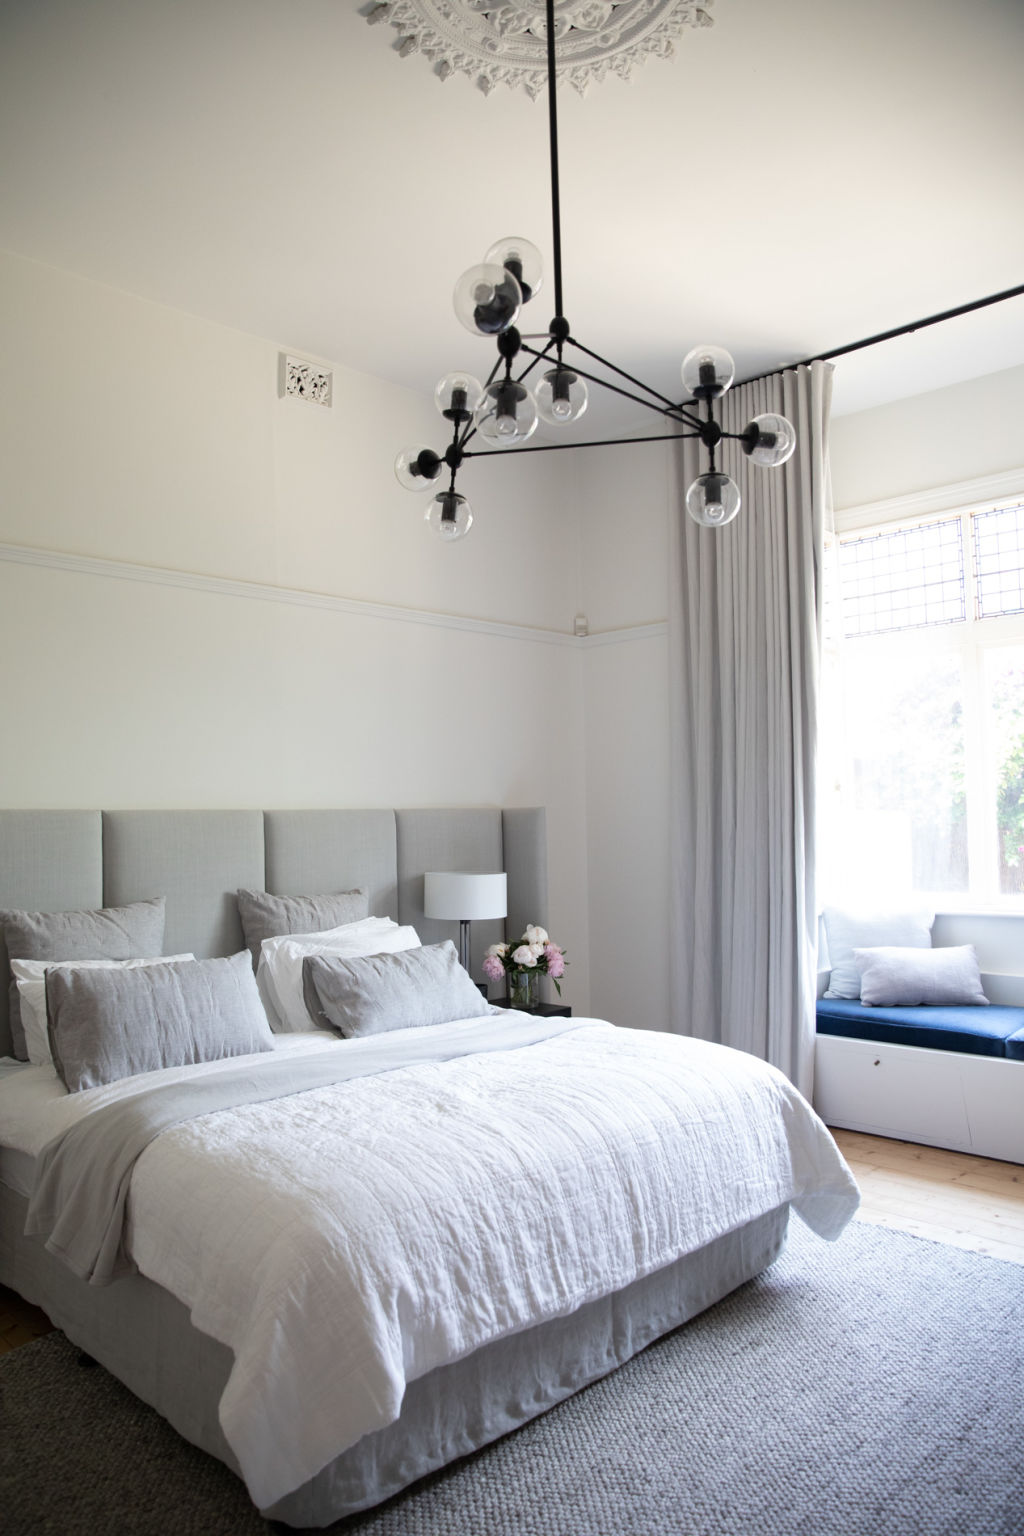 Nadia Bartel's bedroom is a favourite location when shooting at home. Photo: Katie Fergus